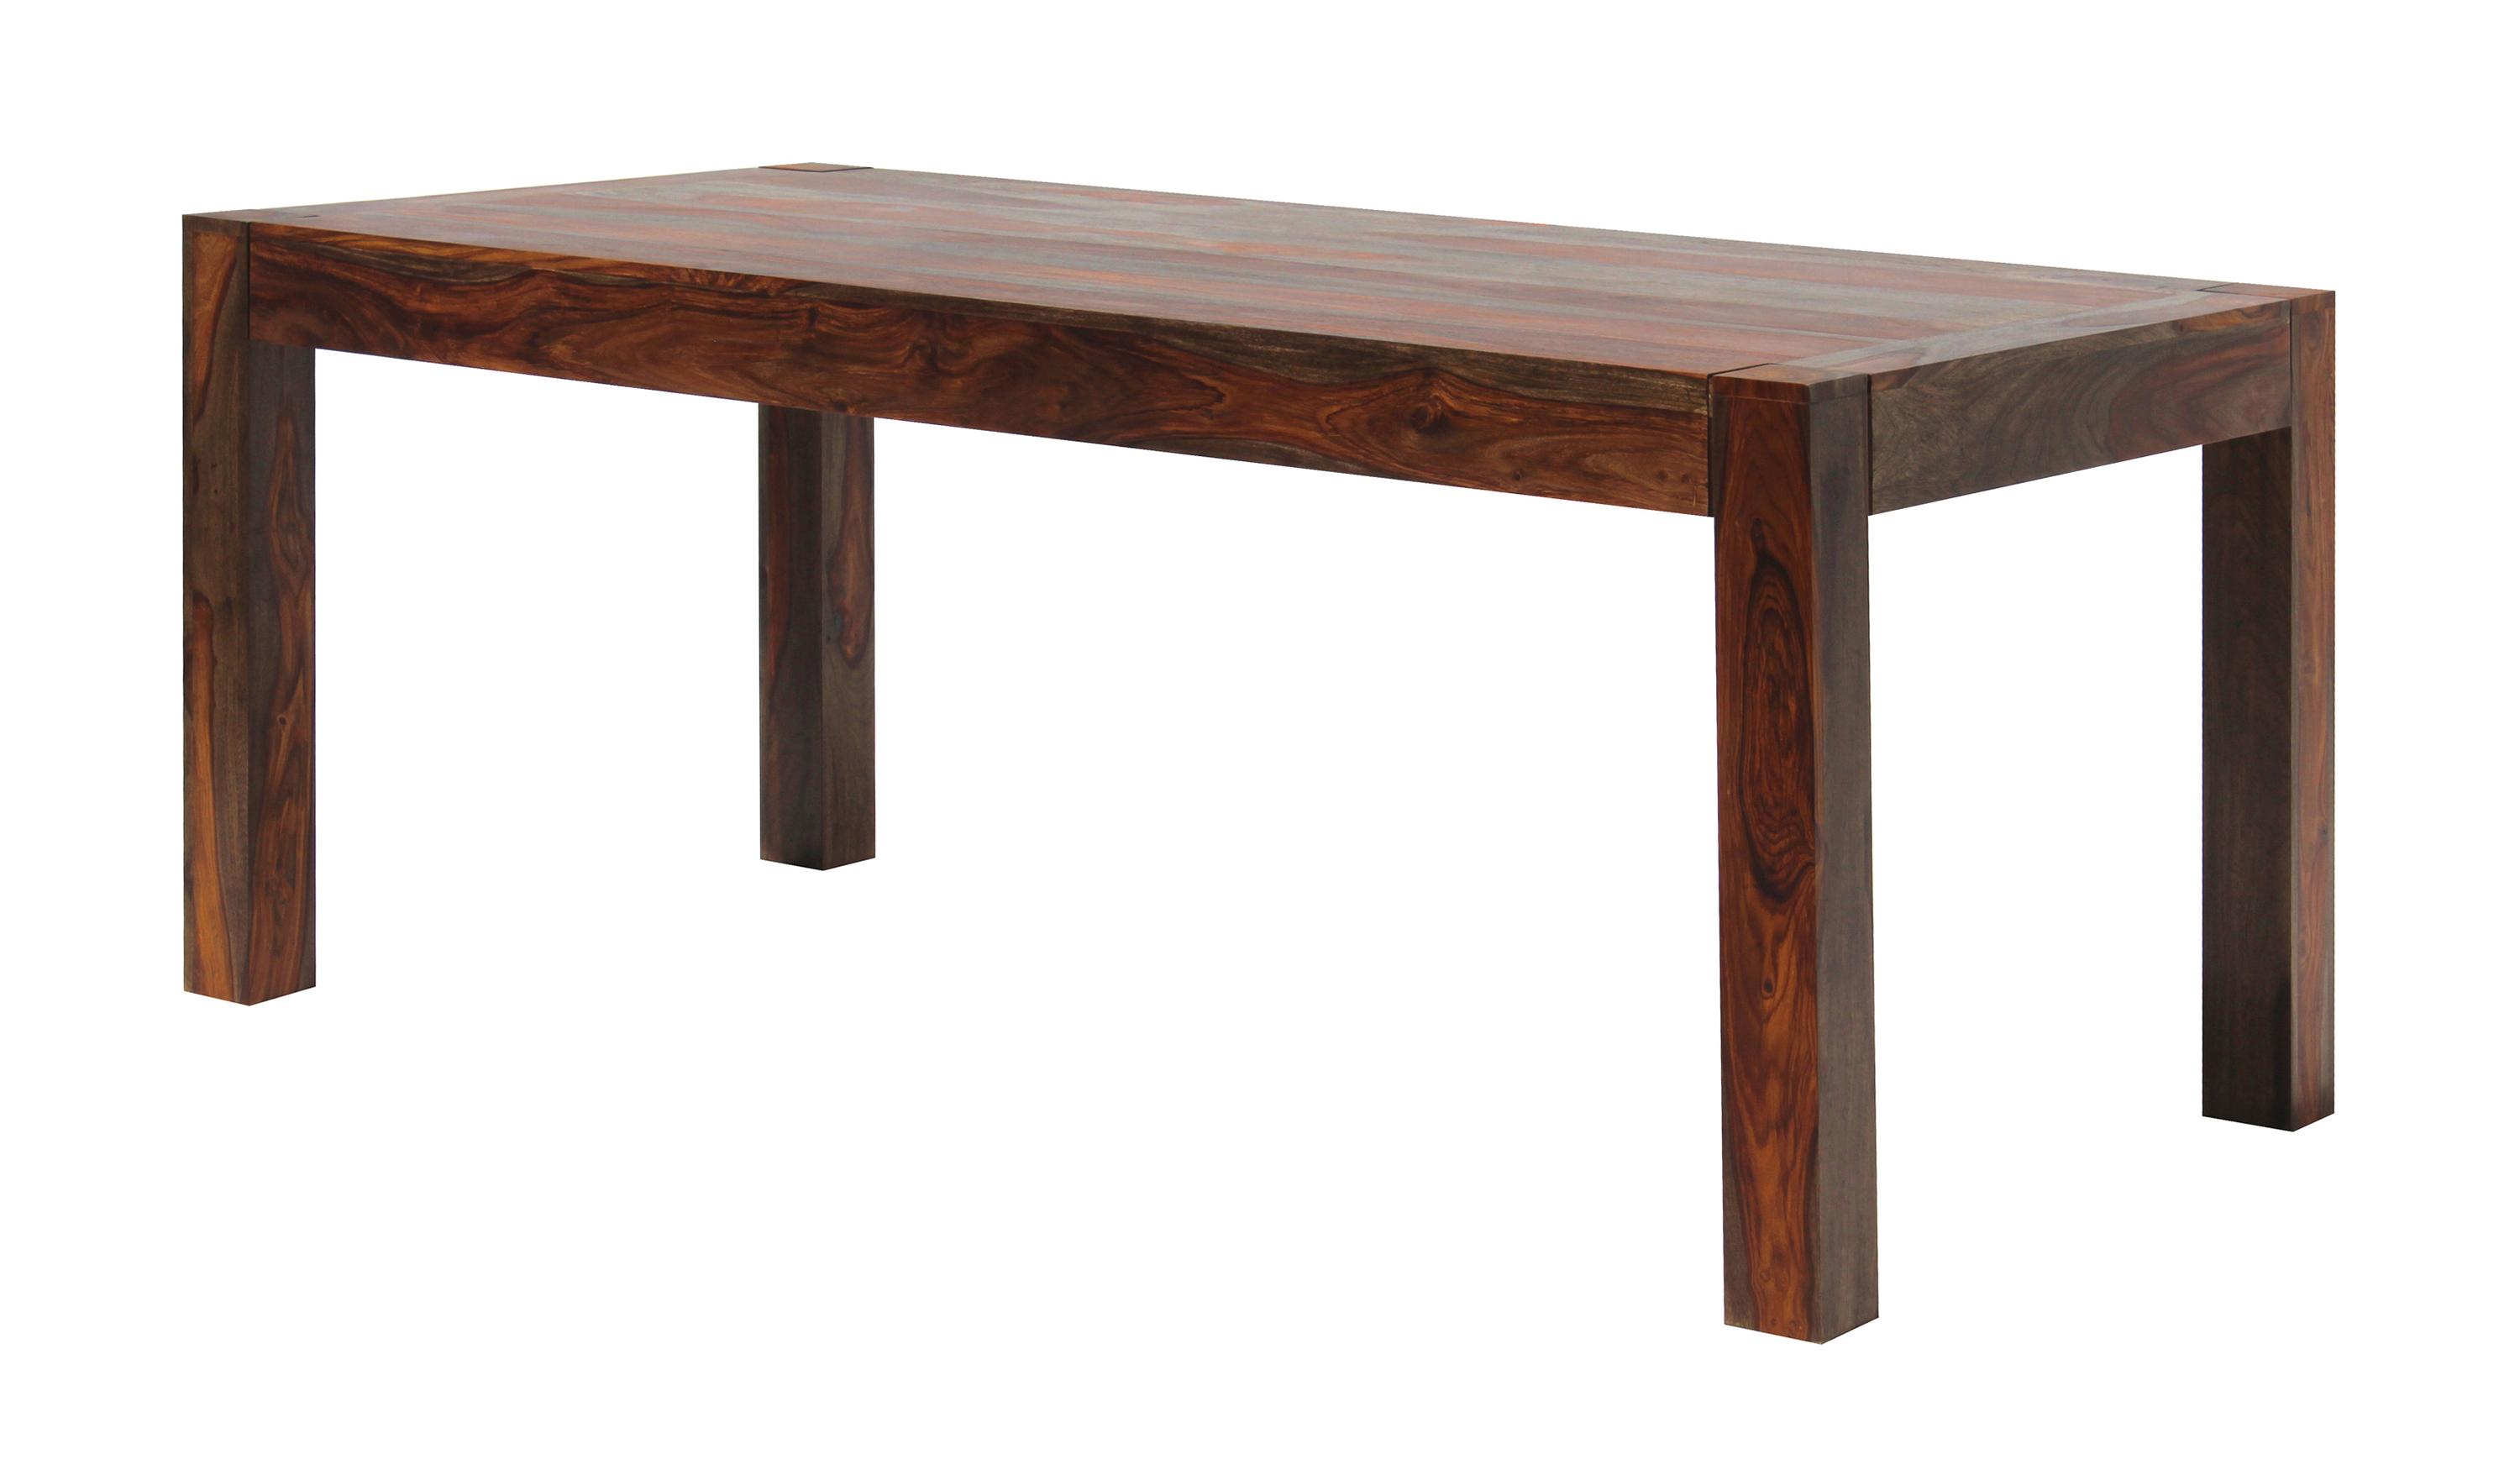 Transitional Counter Height Table 110348 Keats 110348 in Chestnut 